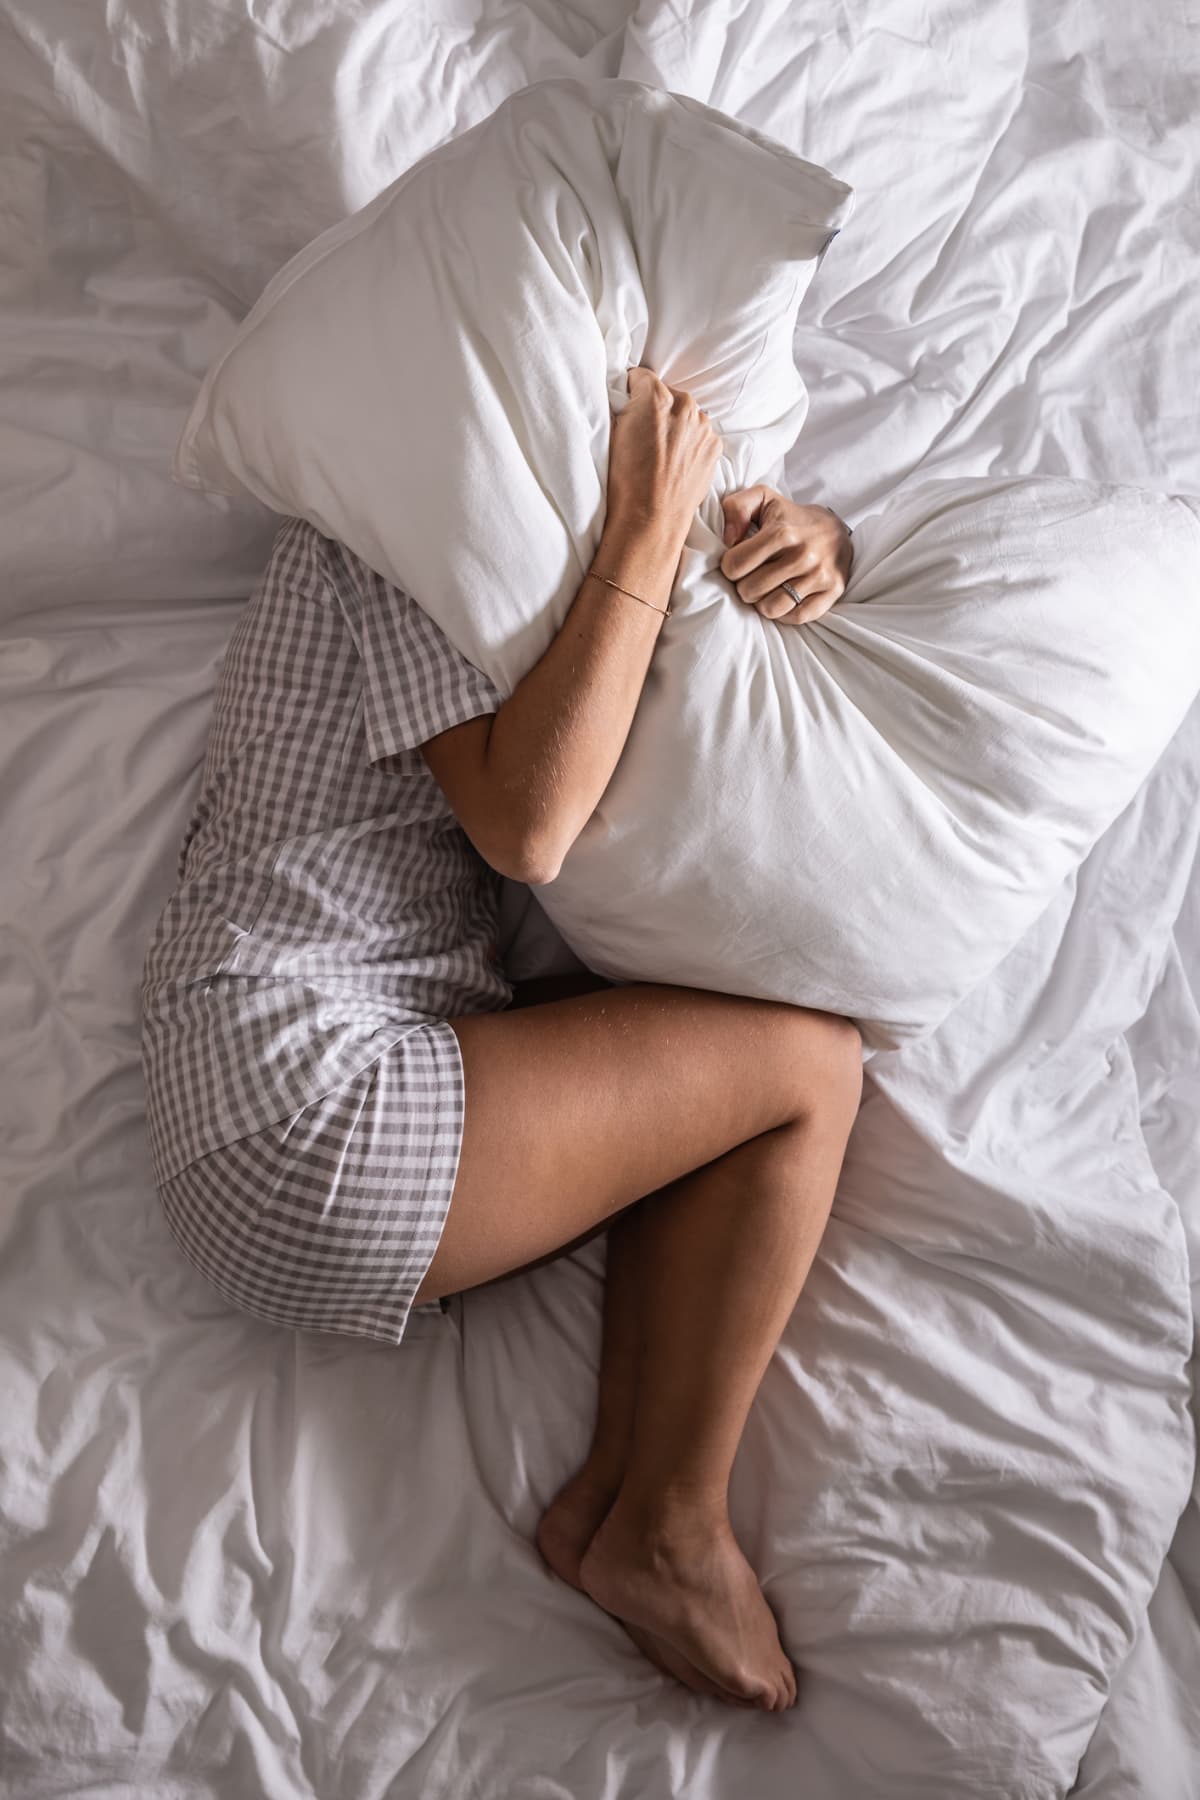 Woman in pyjamas holds pillow over her head, trying to cover from light to get more sleep.